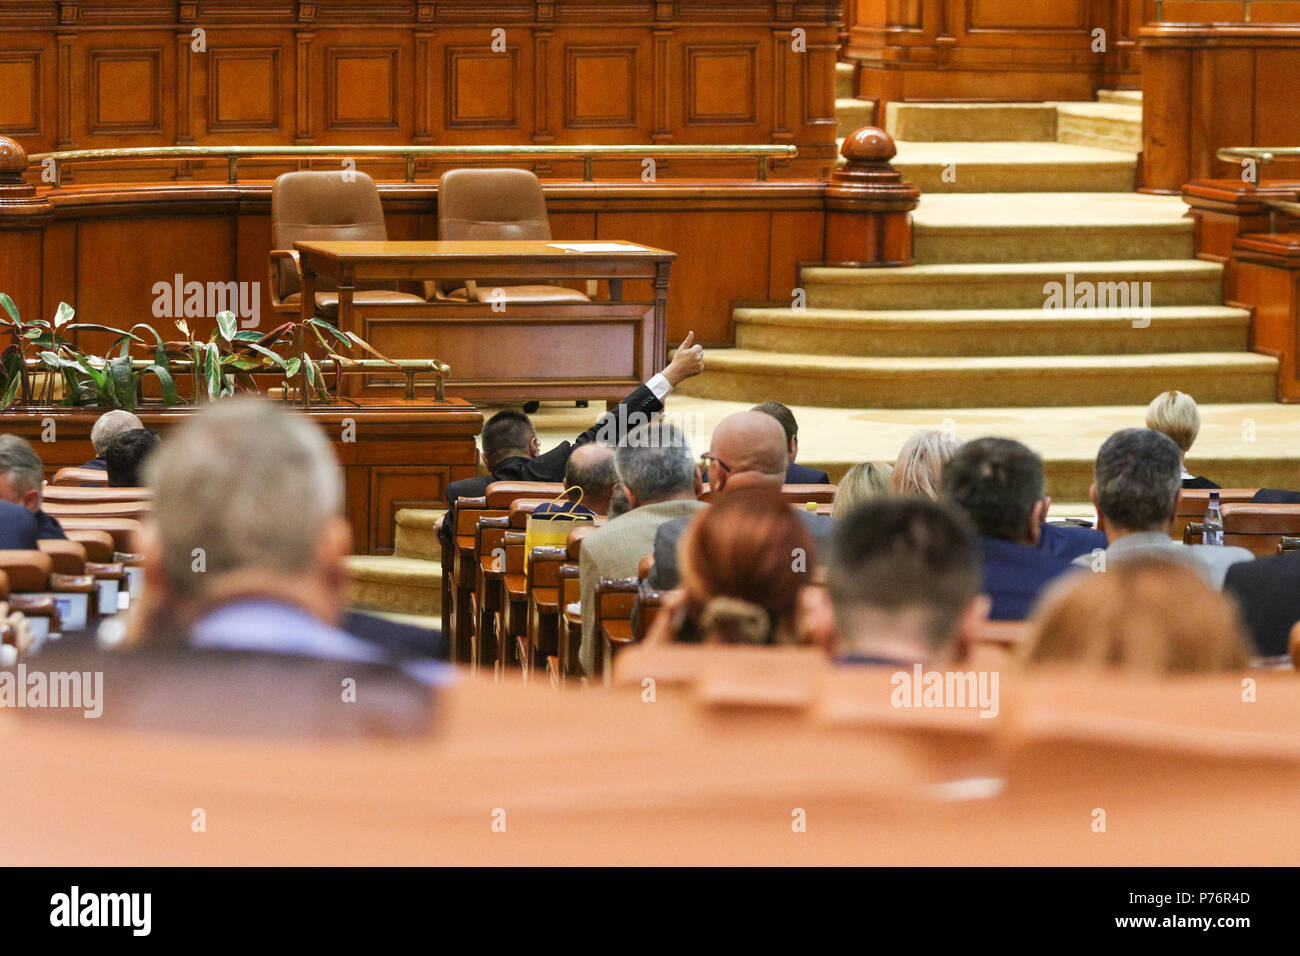 BUCAREST, ROMANIA - JULY 4, 2018: The lider of a parliamentary group signals to his coleagues how to vote during a debate for changing a law Stock Photo